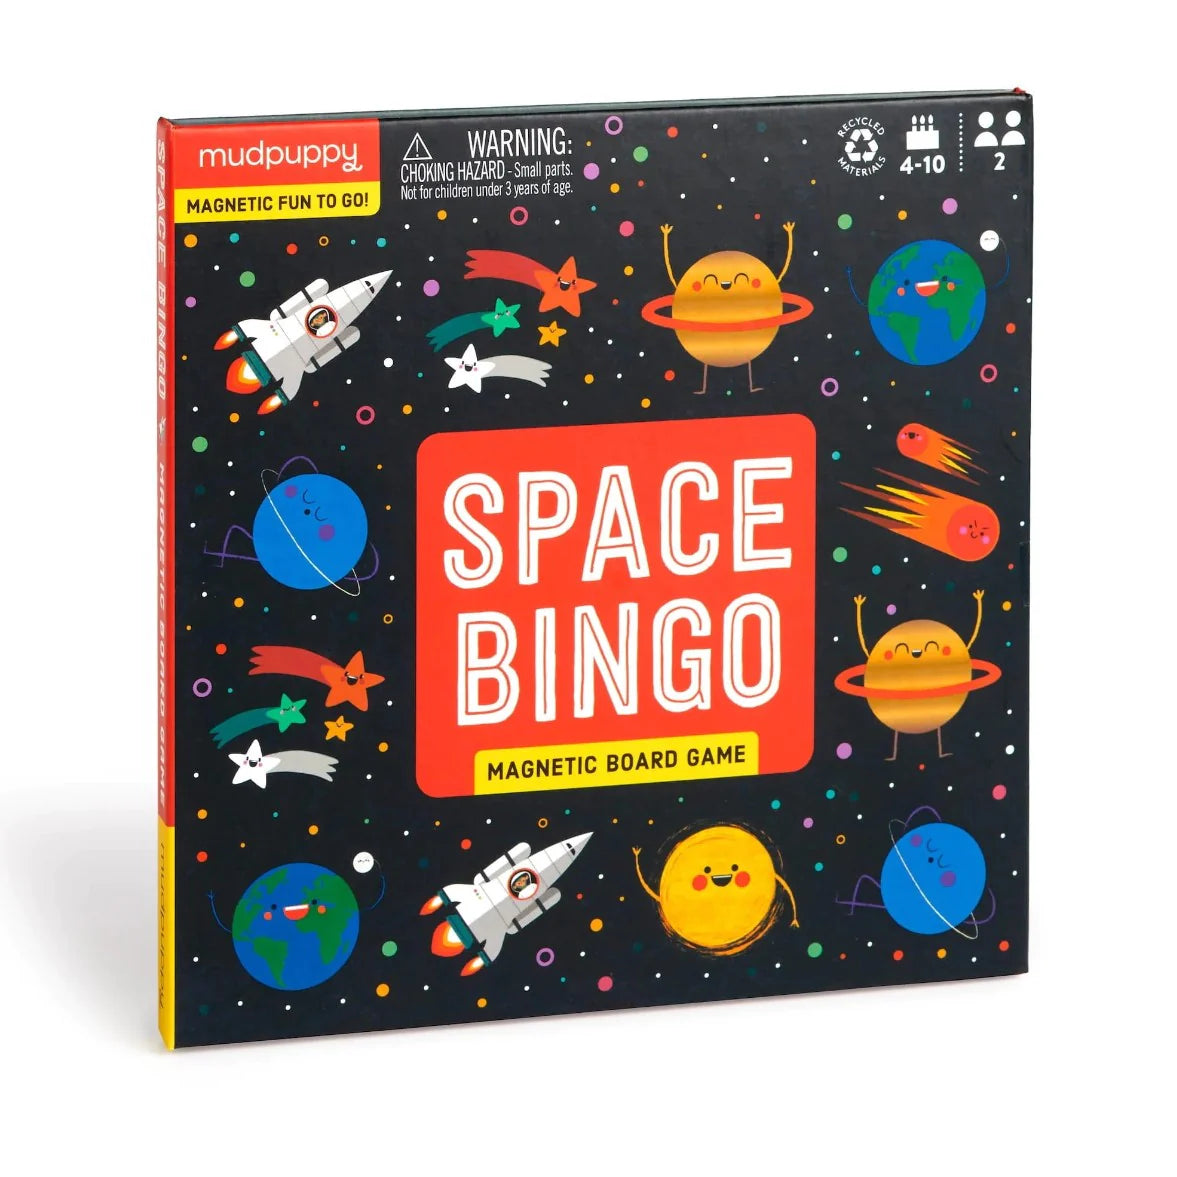 Mudpuppy Outer Space Bingo Magnetic Board Game - Taylorson